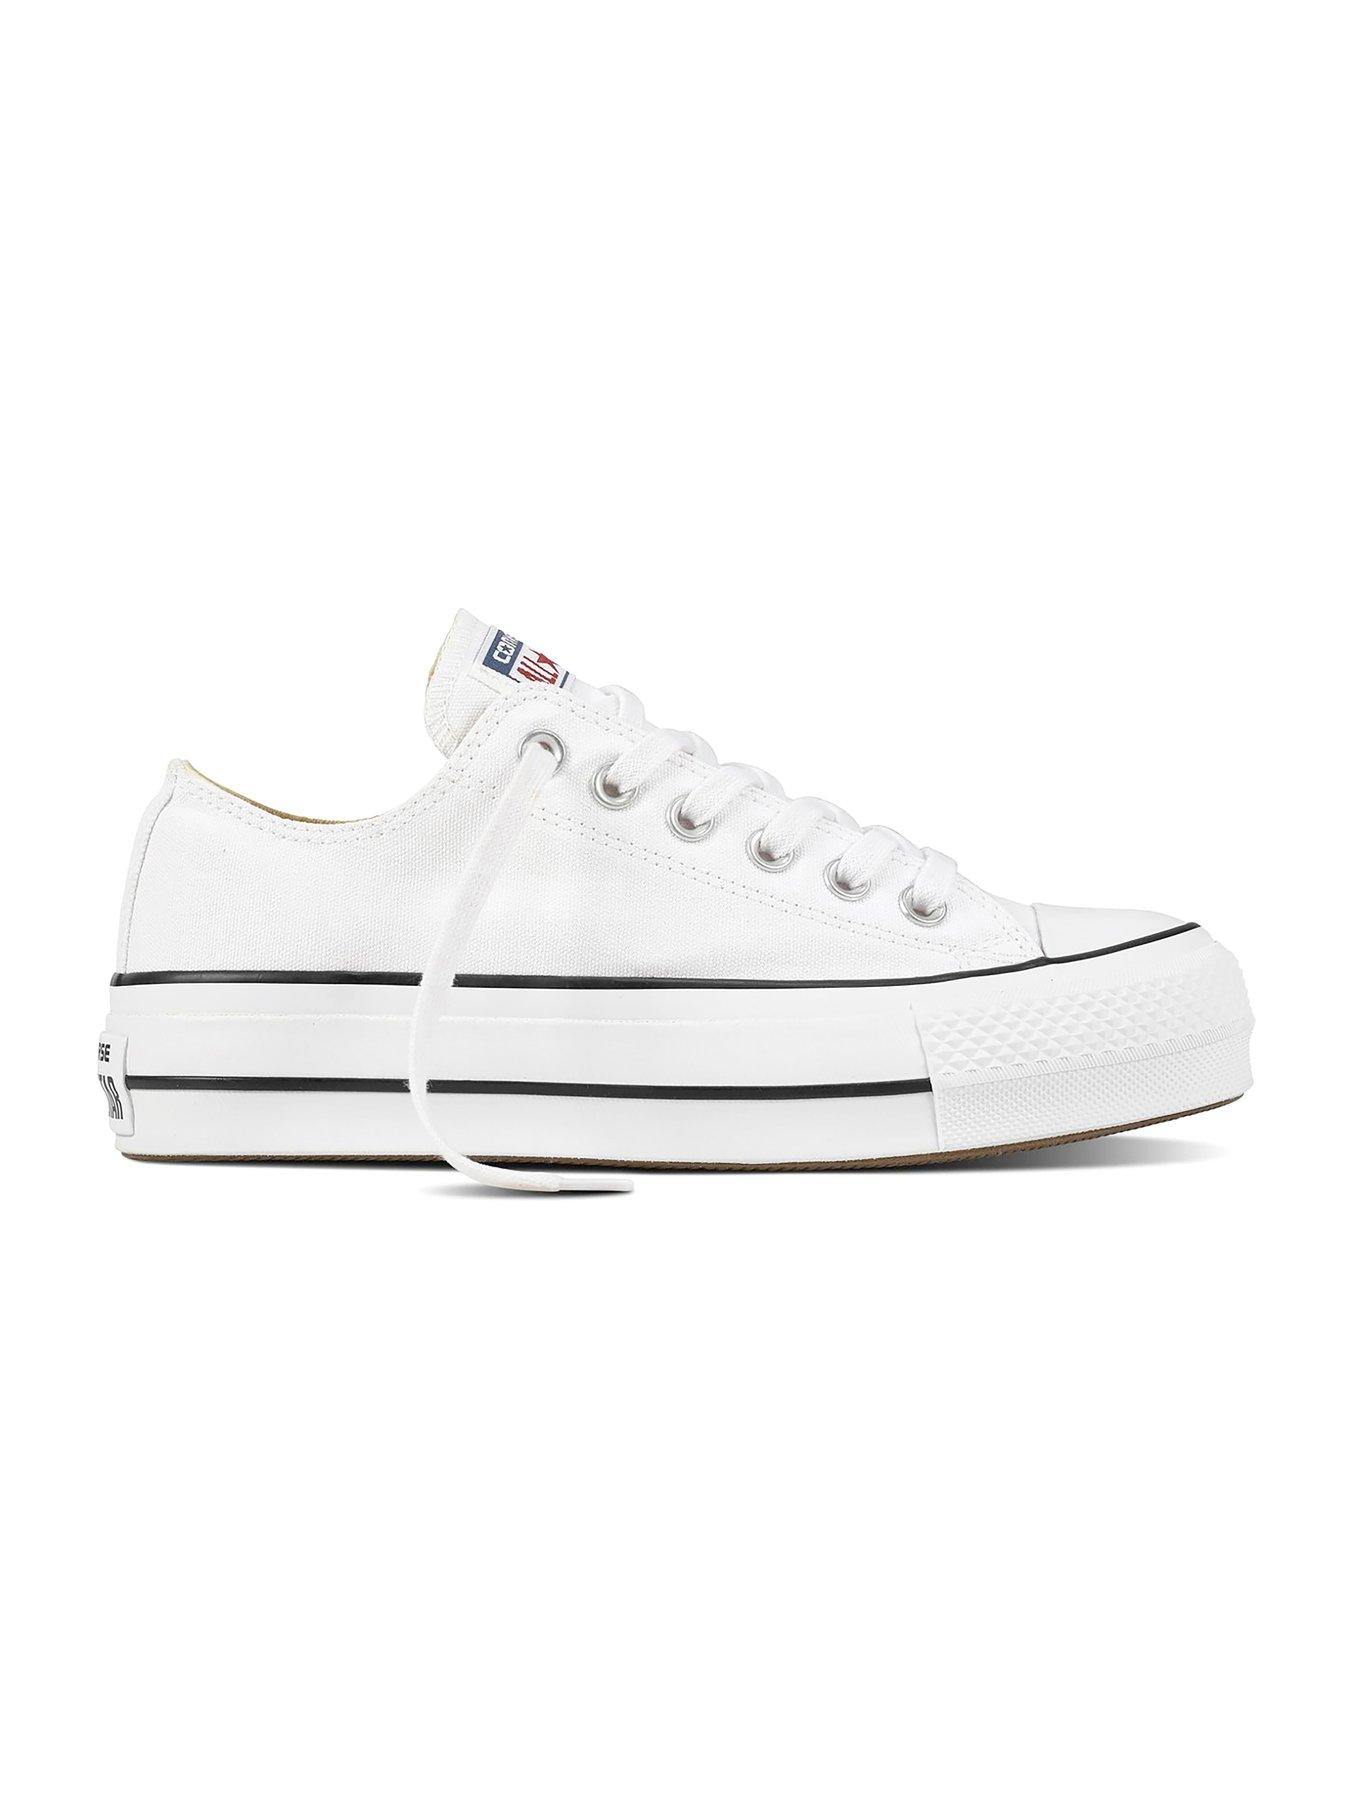 converse white all star leather ox trainers